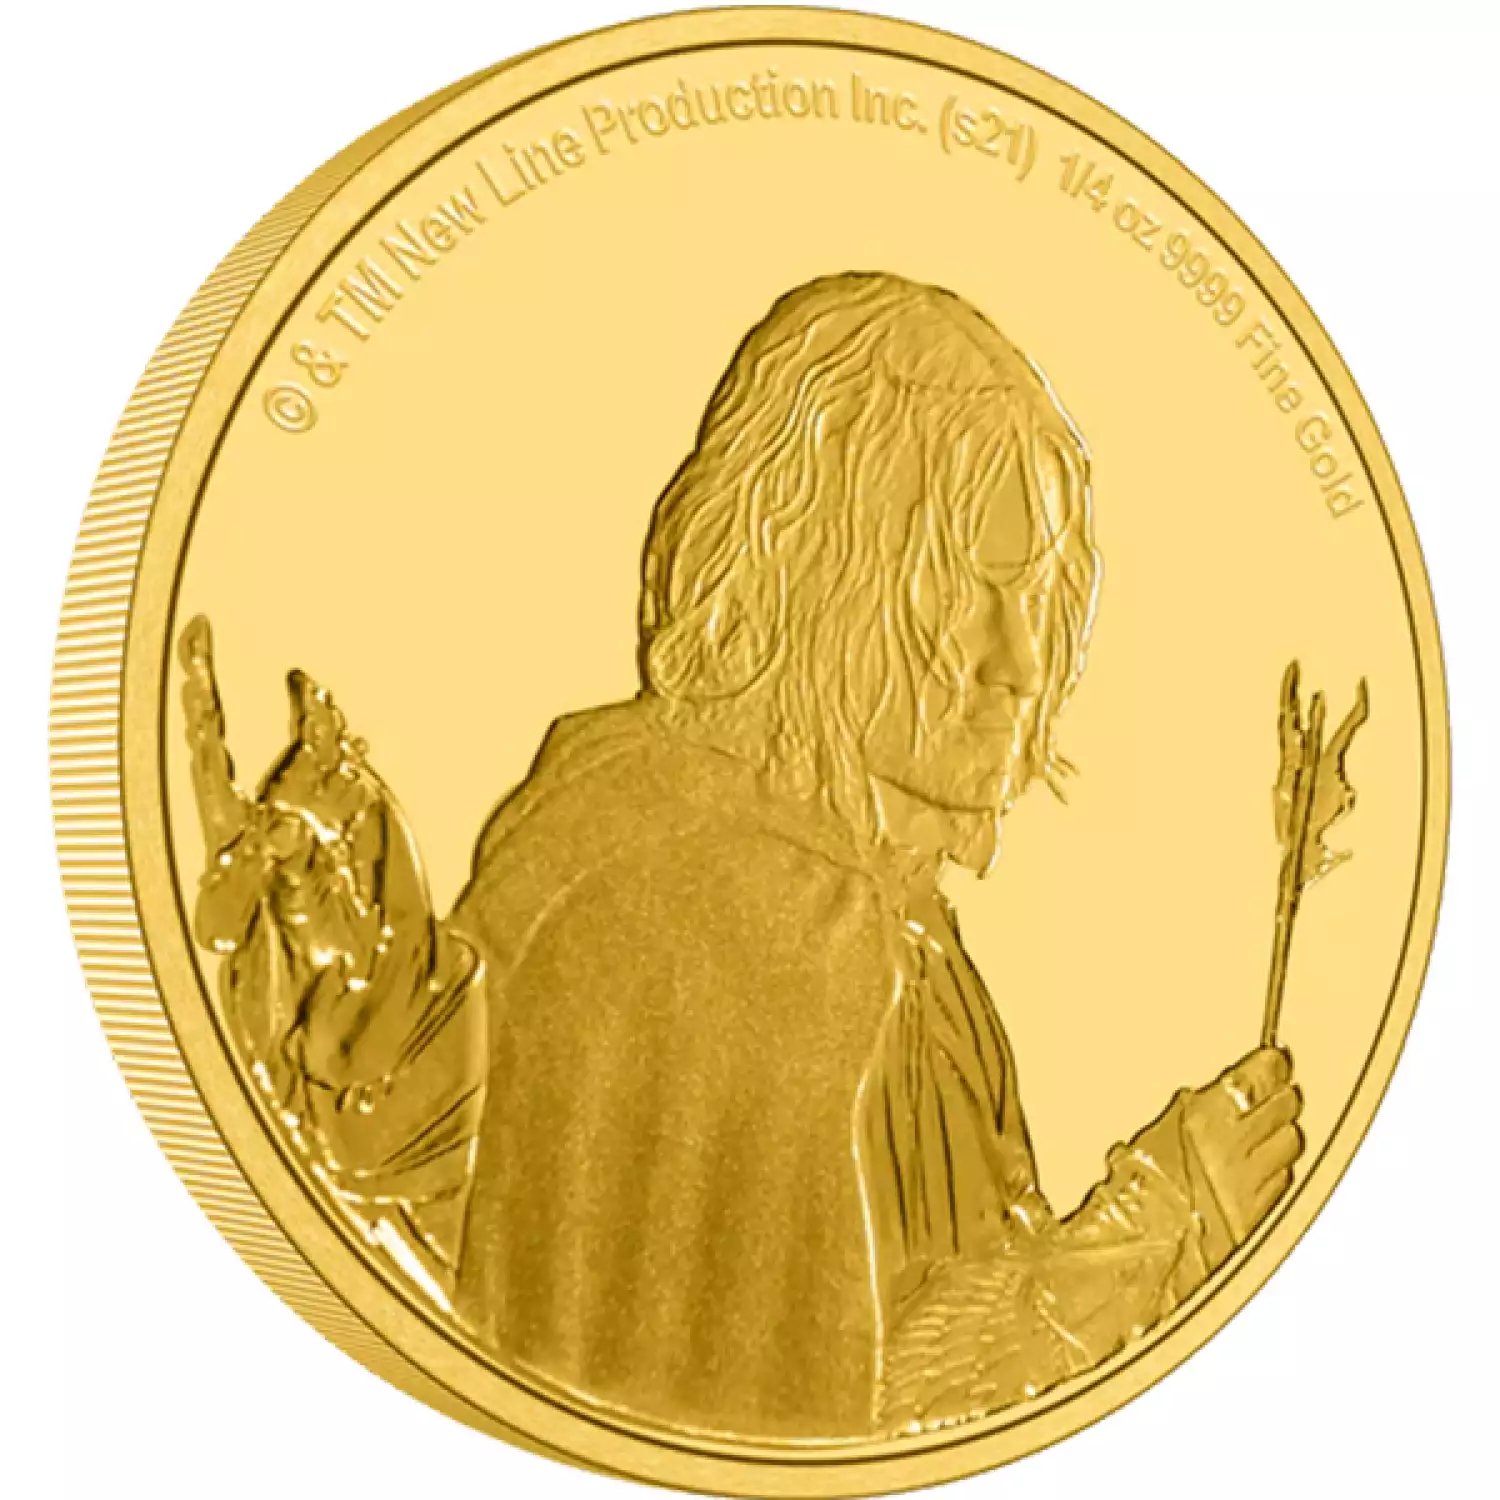 THE LORD OF THE RINGS - 2021 1/4 oz Aragorn Gold Coin (2)